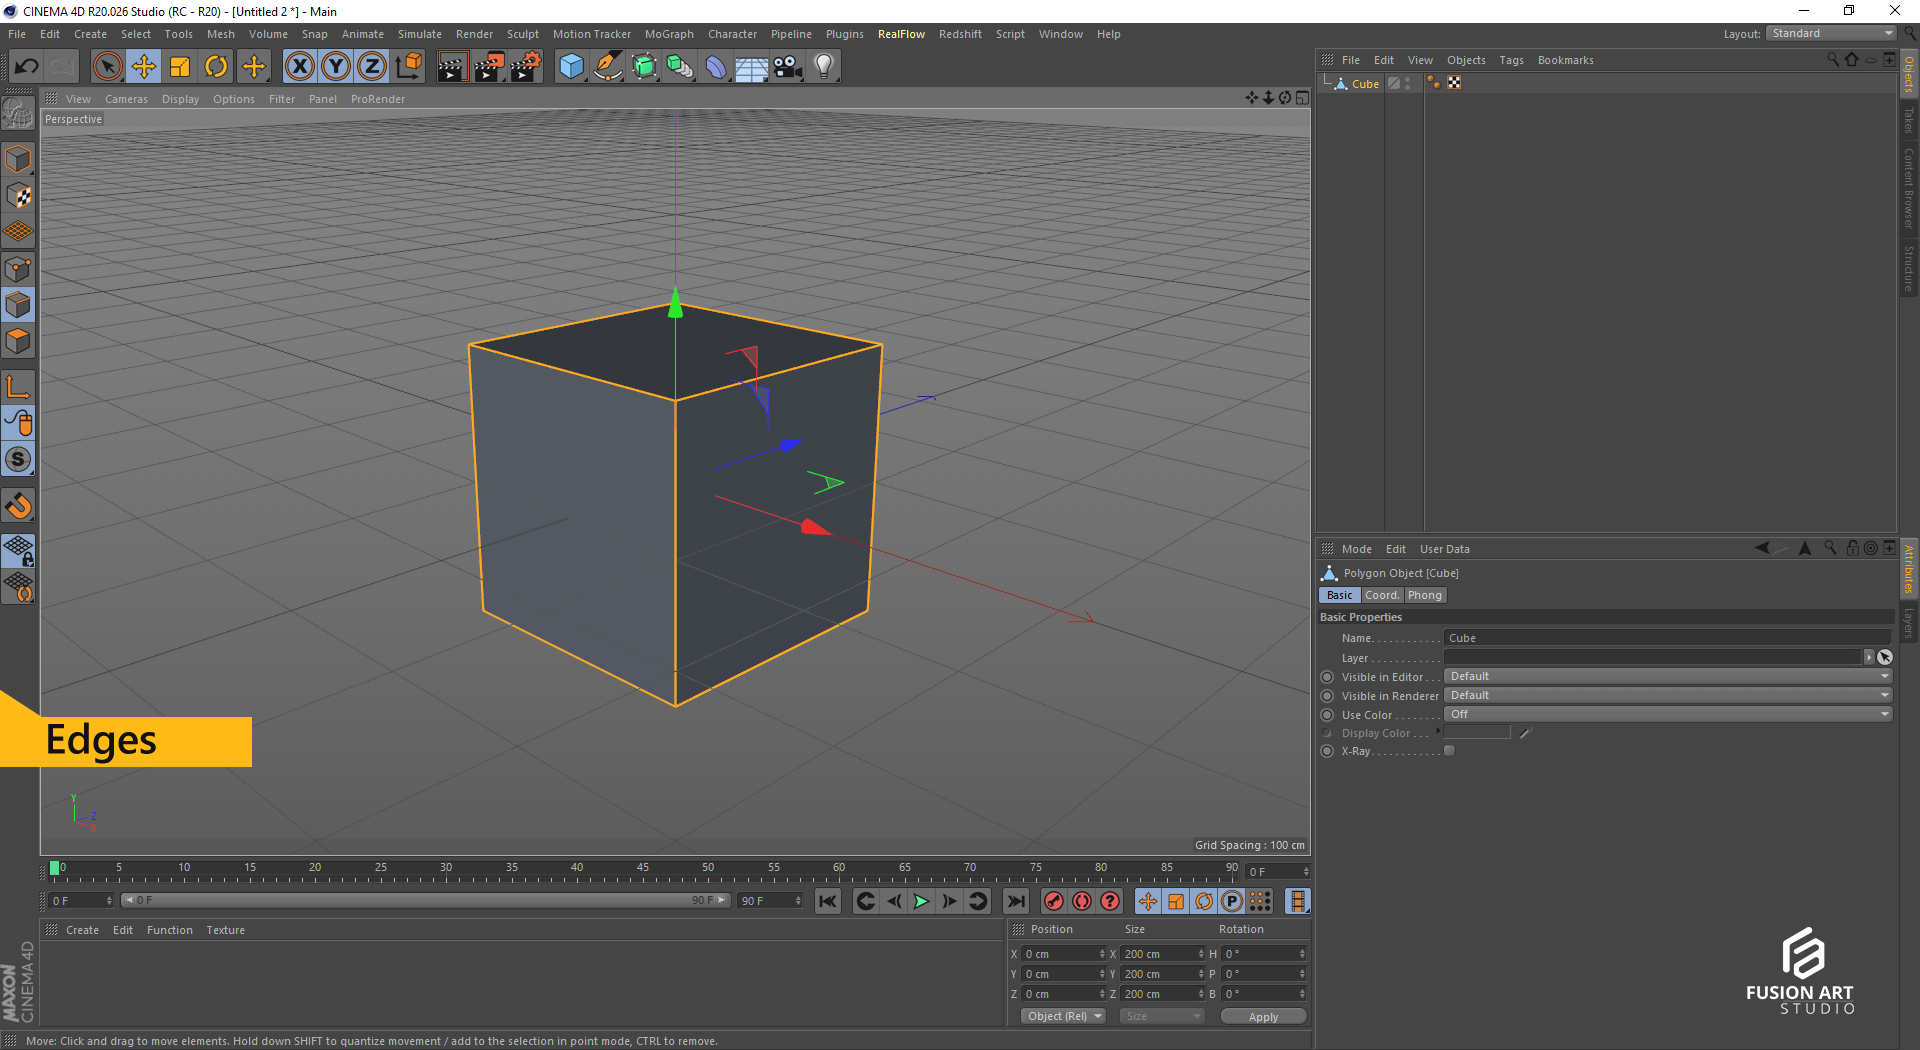 How Edges, Vertices, and Faces are helpful for modeling?